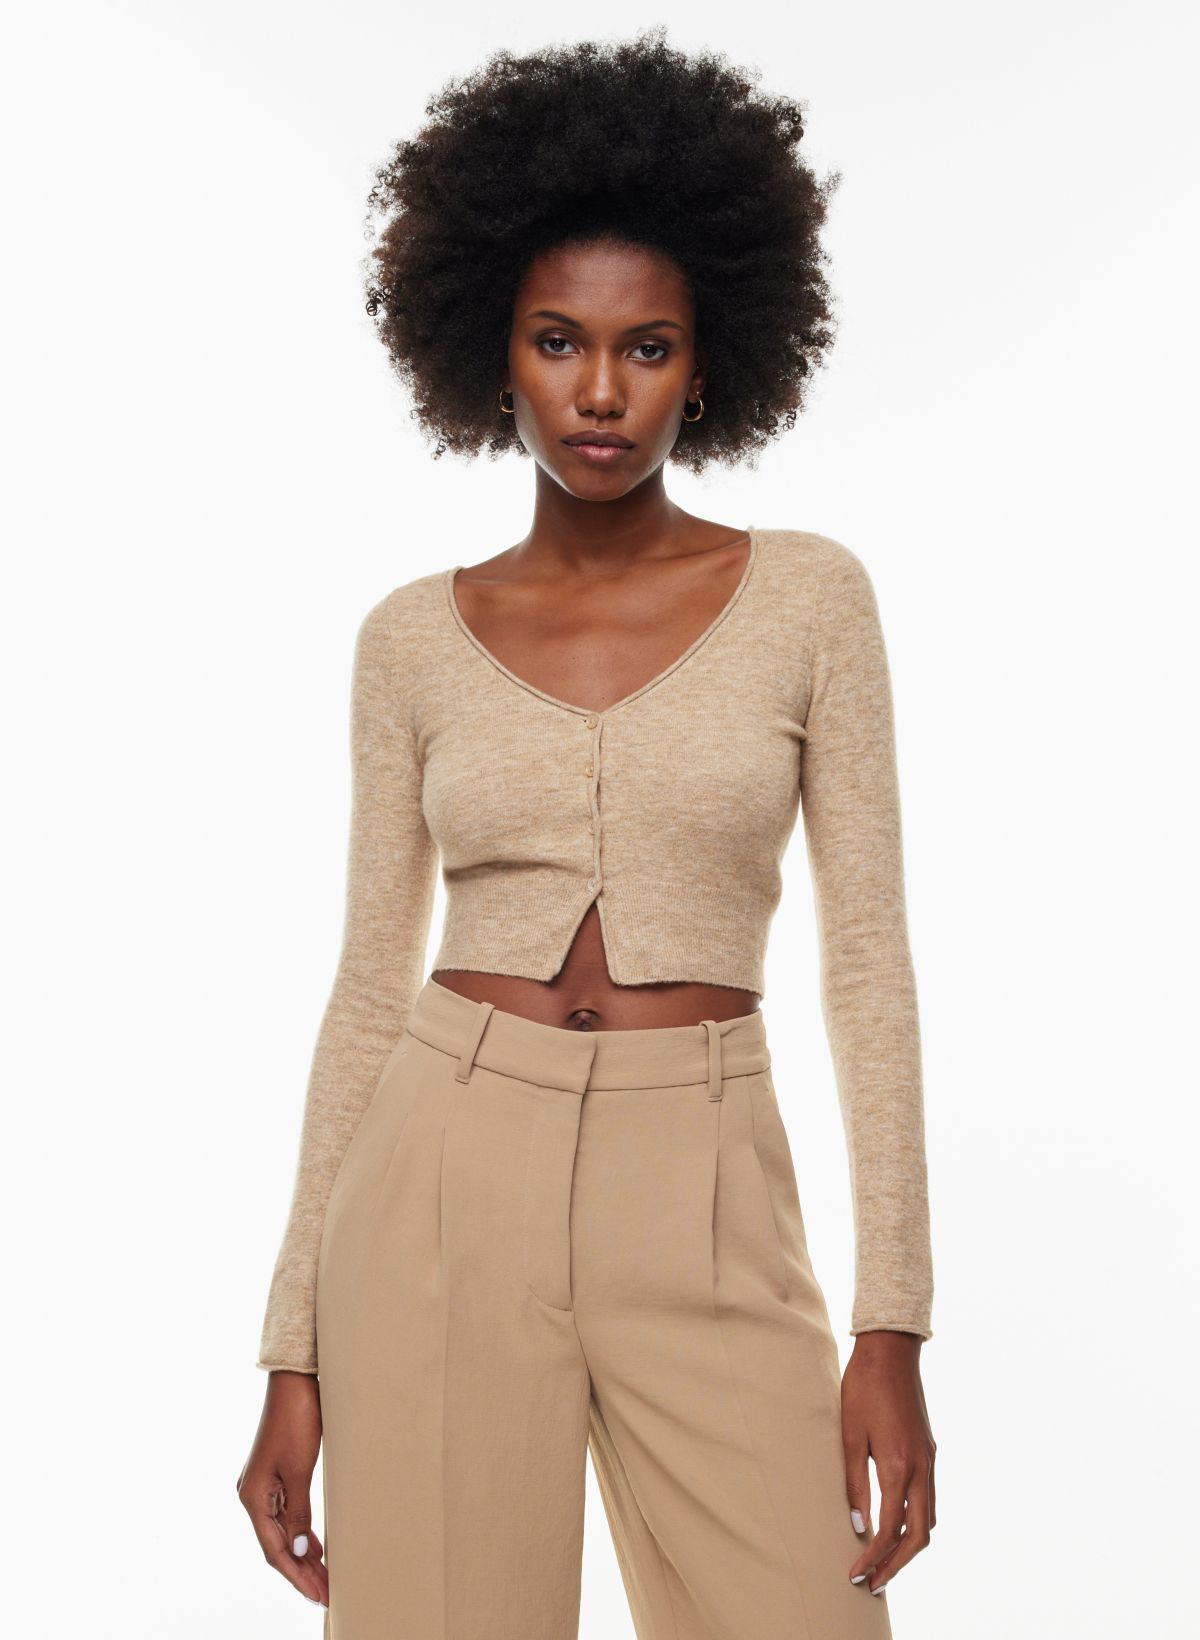 Limitless Contour Collection 10 Crop Top from Zara on 21 Buttons